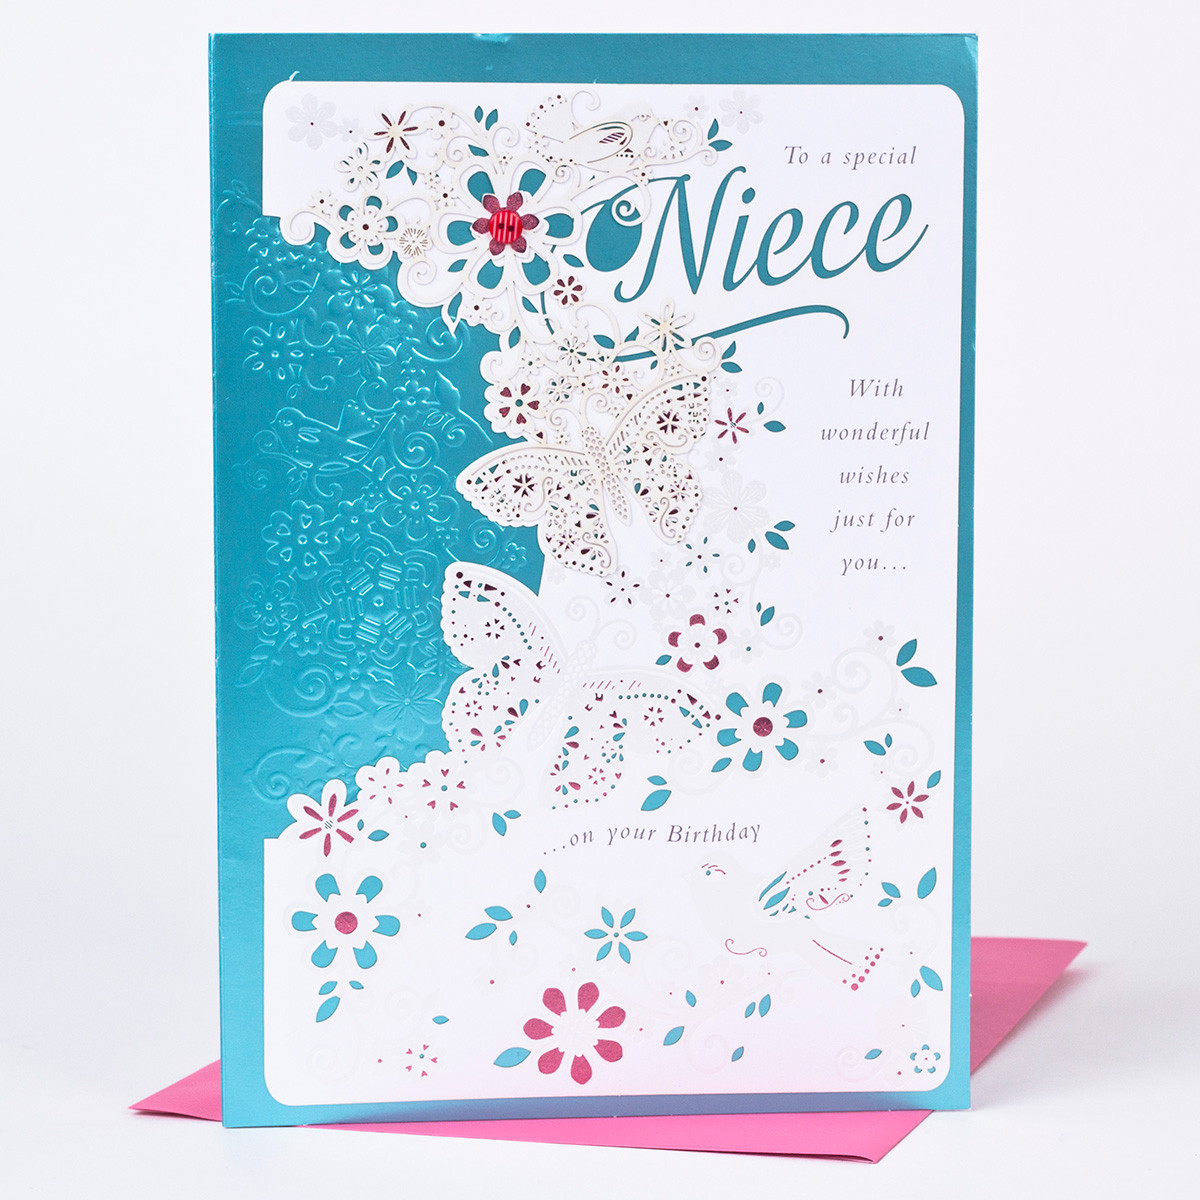 Niece Birthday Cards
 The top 22 Ideas About Niece Birthday Card – Home Family